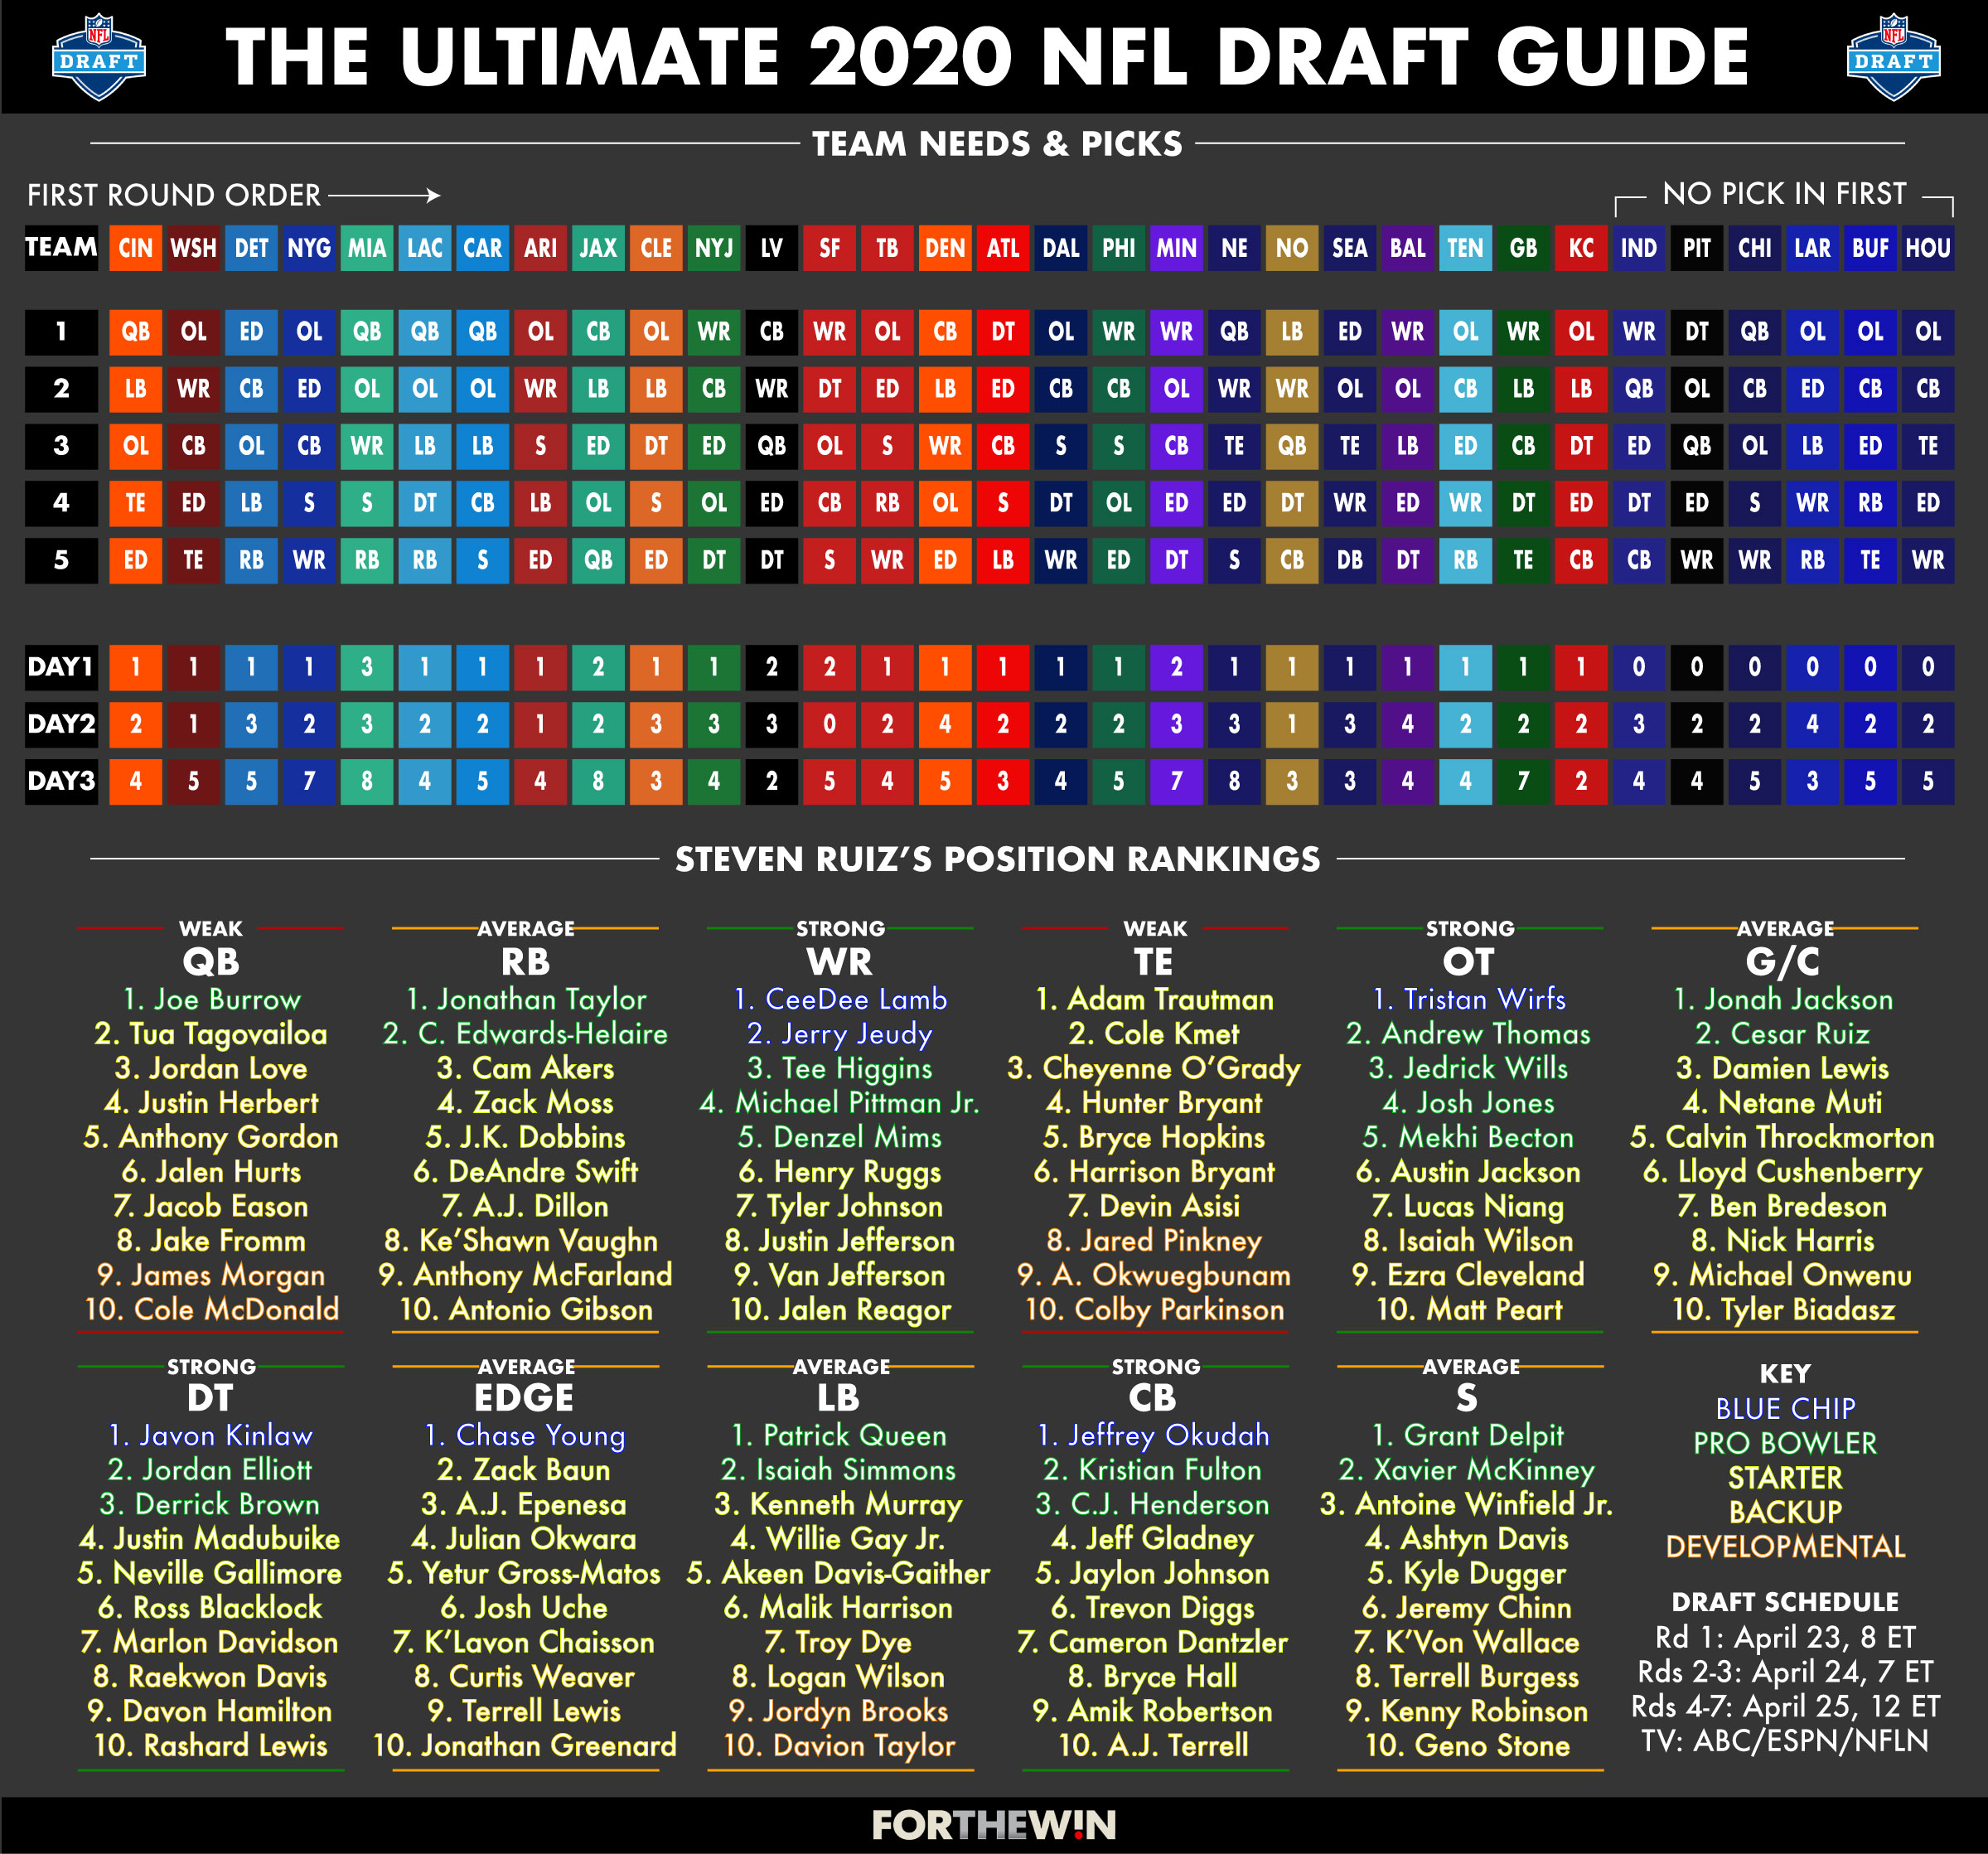 draft pick projections